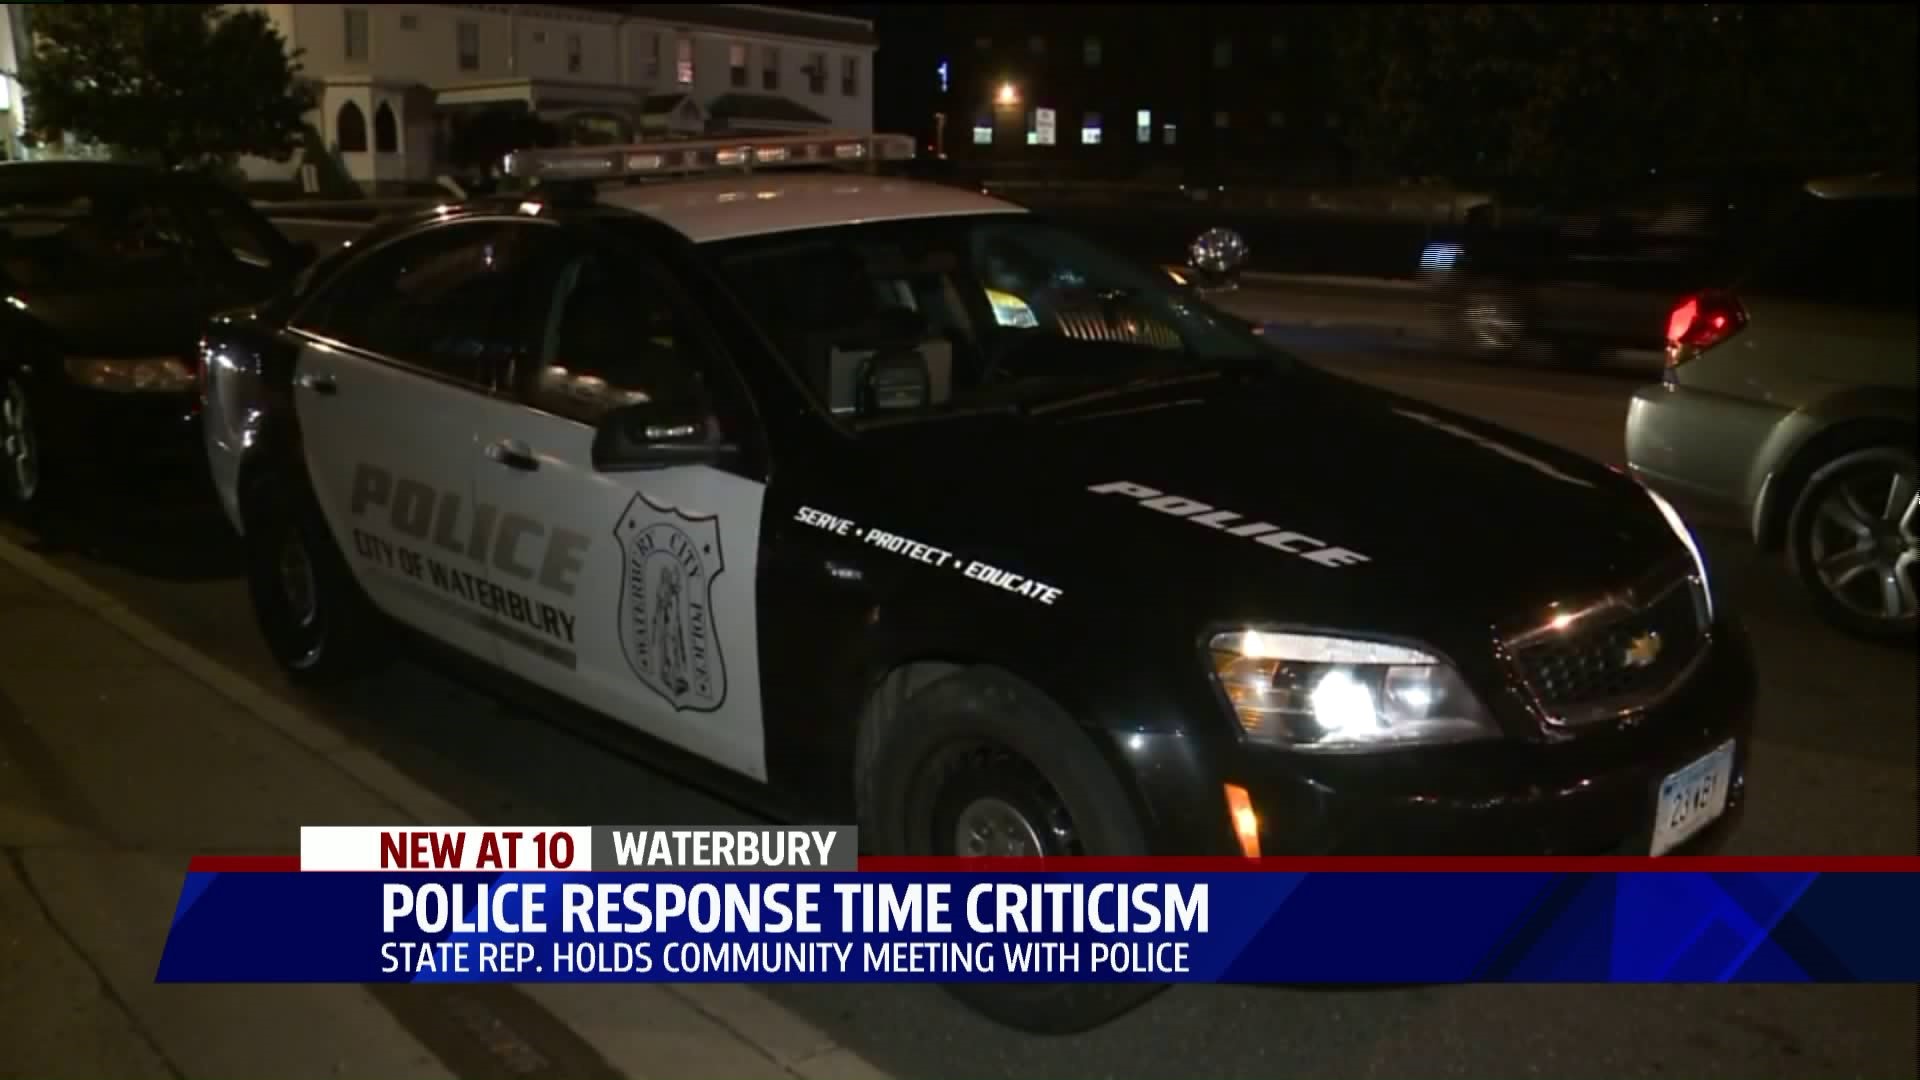 Police response times